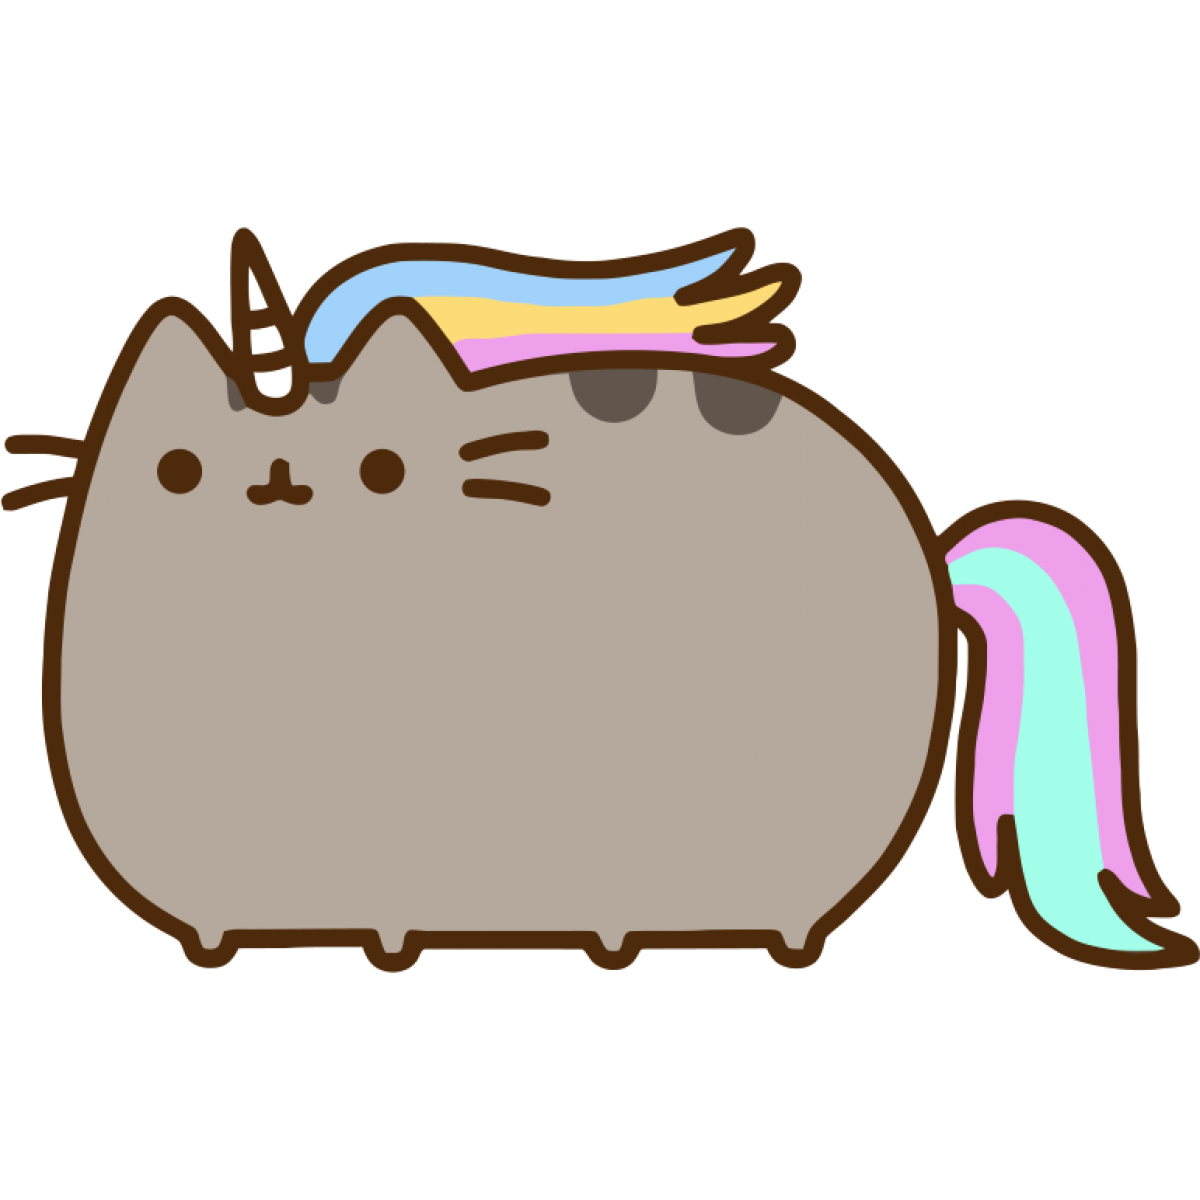 Download Food Snout Gund Pusheen Cat PNG Image High Quality HQ PNG Image Fr...